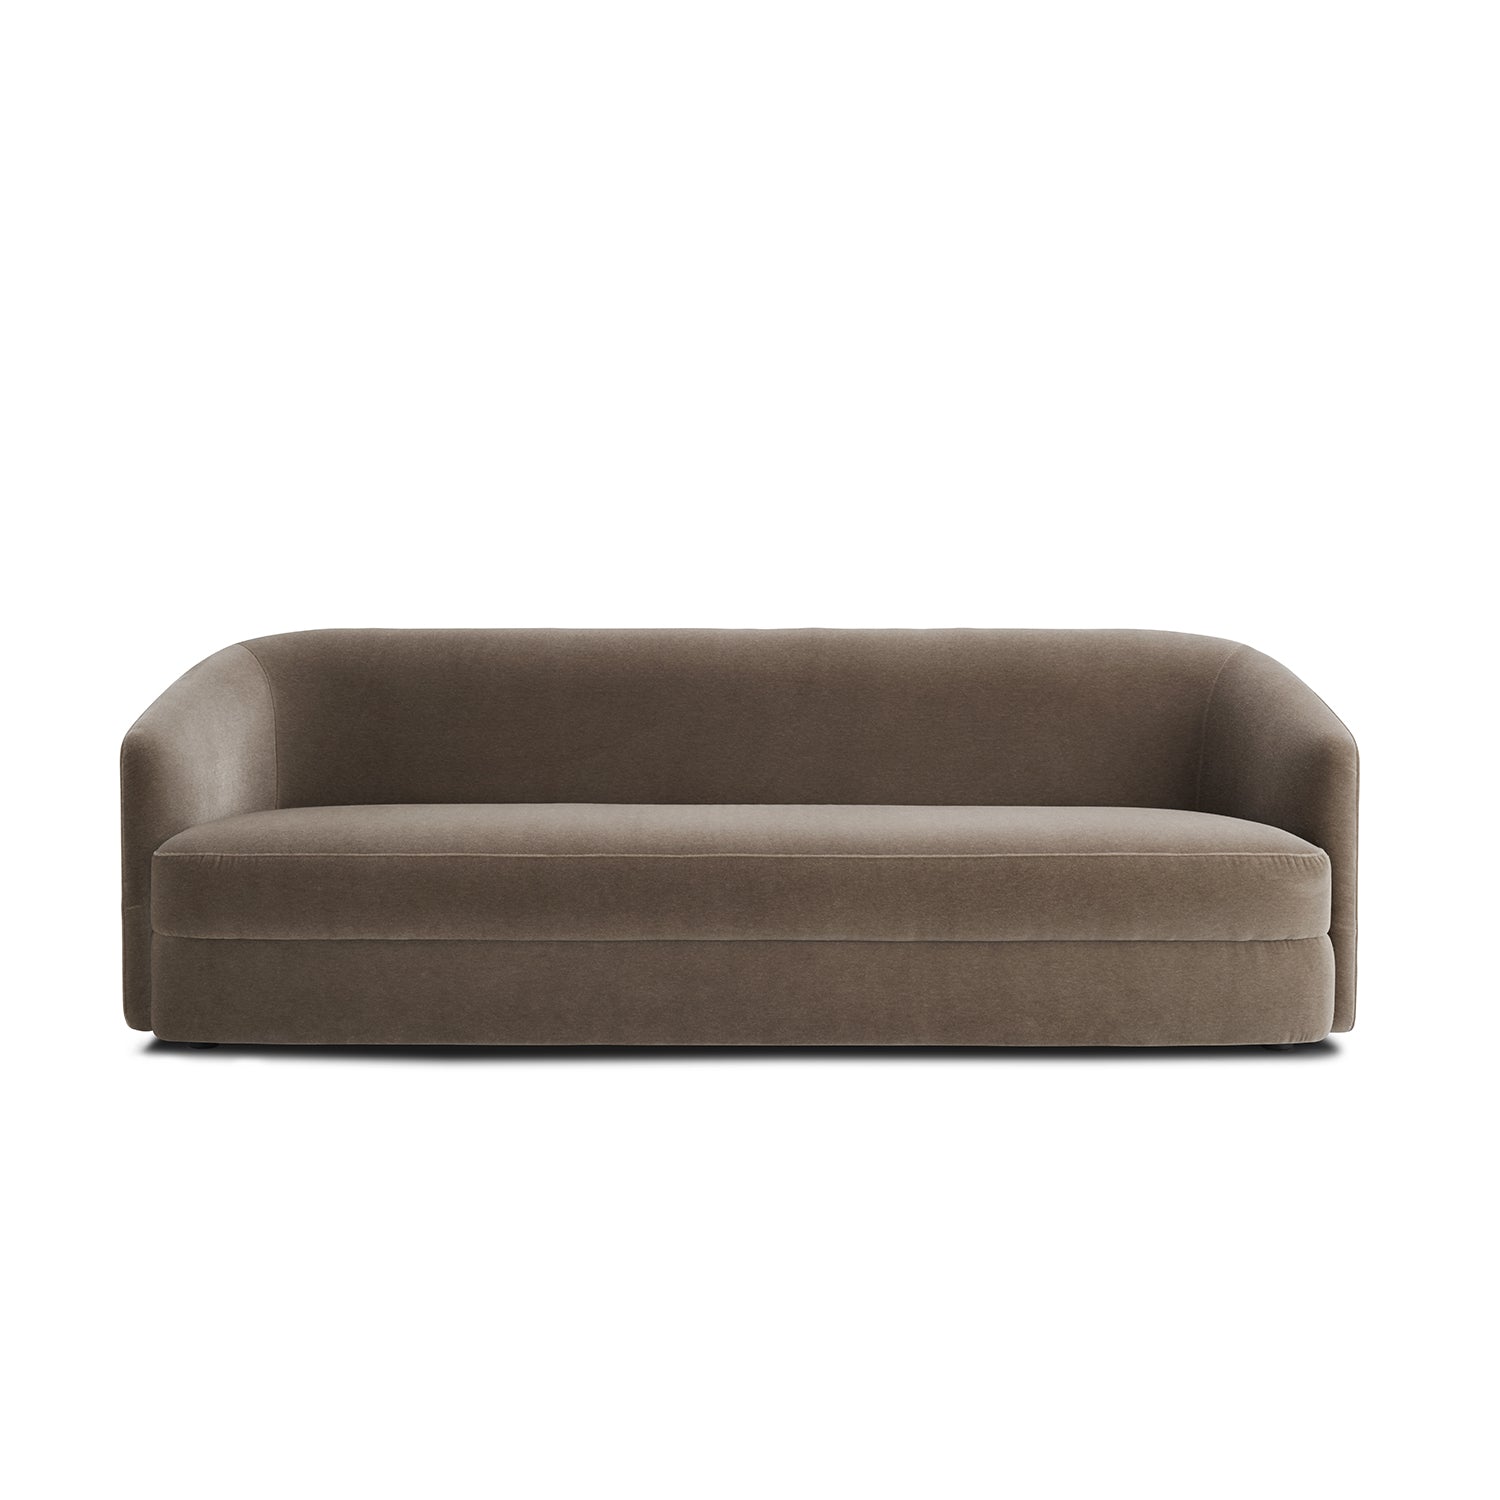 New Works Covewnt 3 Seater sofa in dark taupe